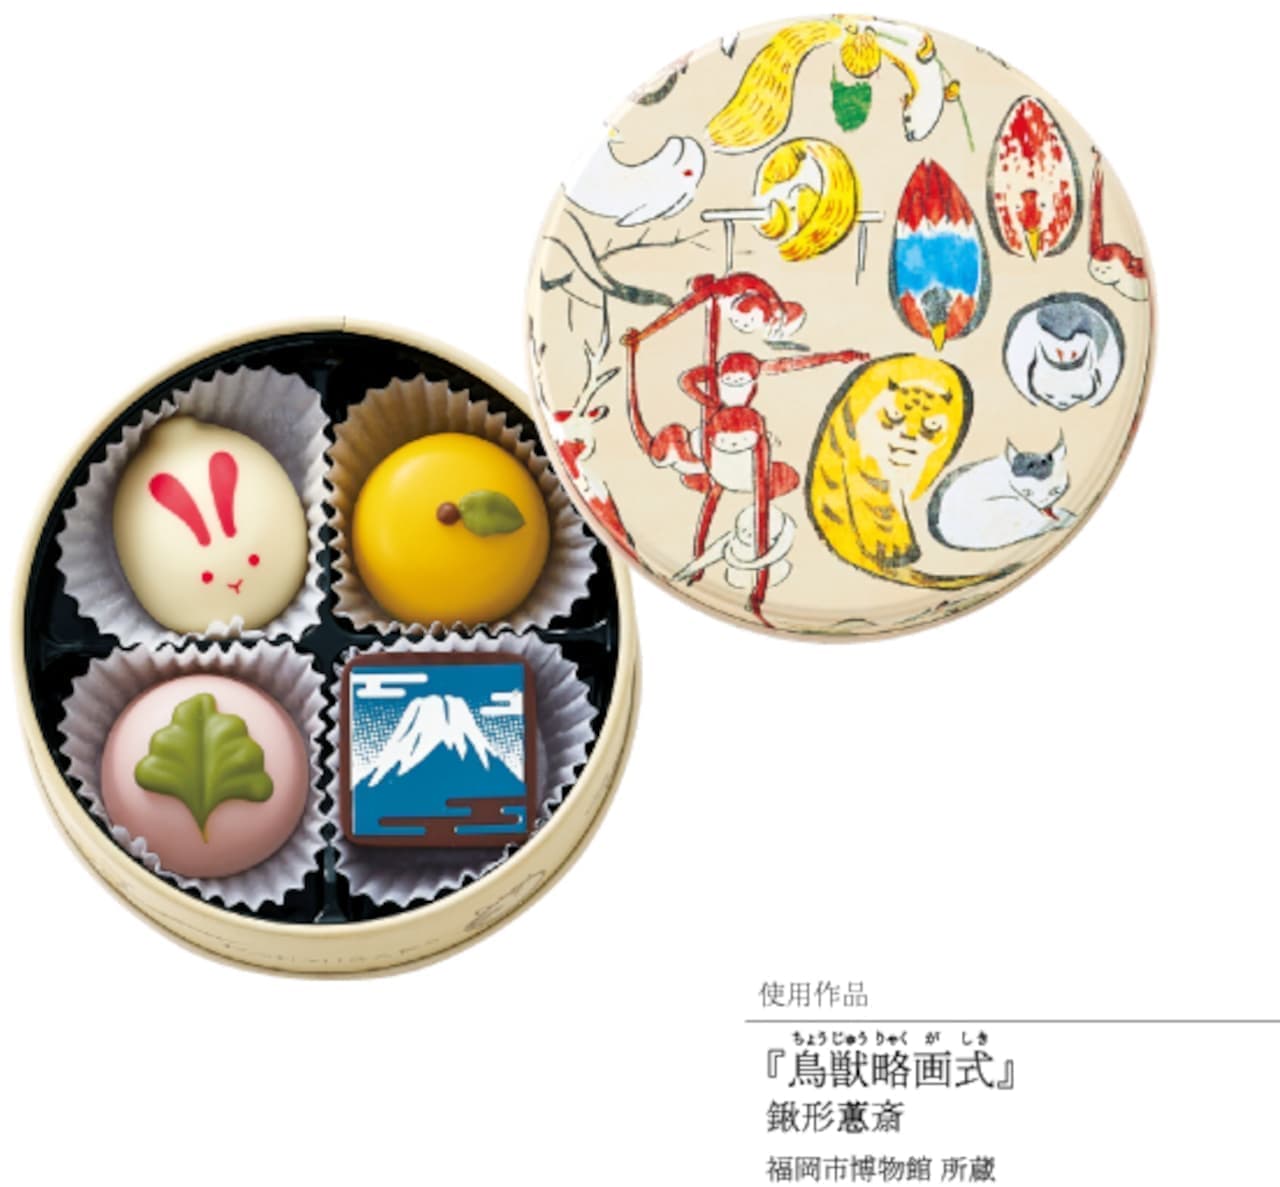 Goncharov "Wagashi Shokora B (Keisai Kuwagata (Megumi is a different character), birds and animals in abbreviated form)